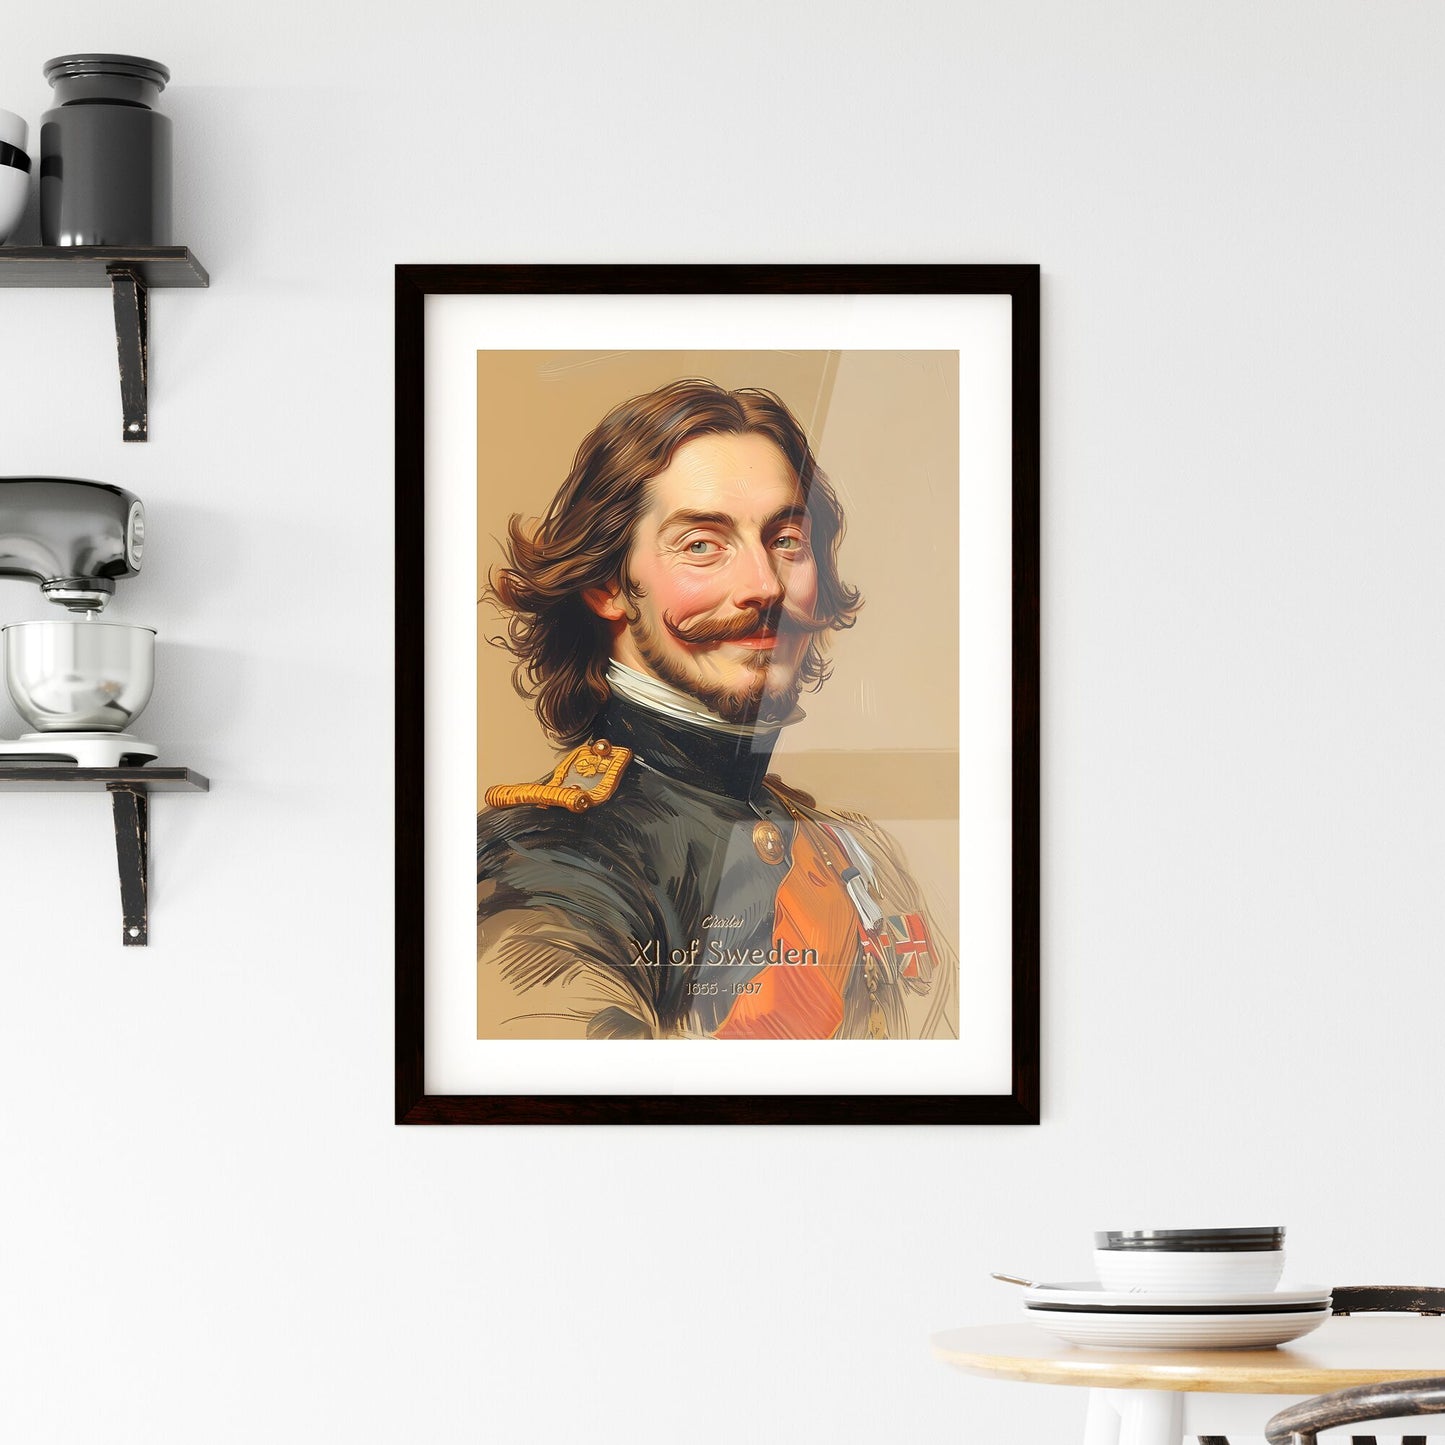 Charles, XI of Sweden, 1655 - 1697, A Poster of a man in a military uniform Default Title